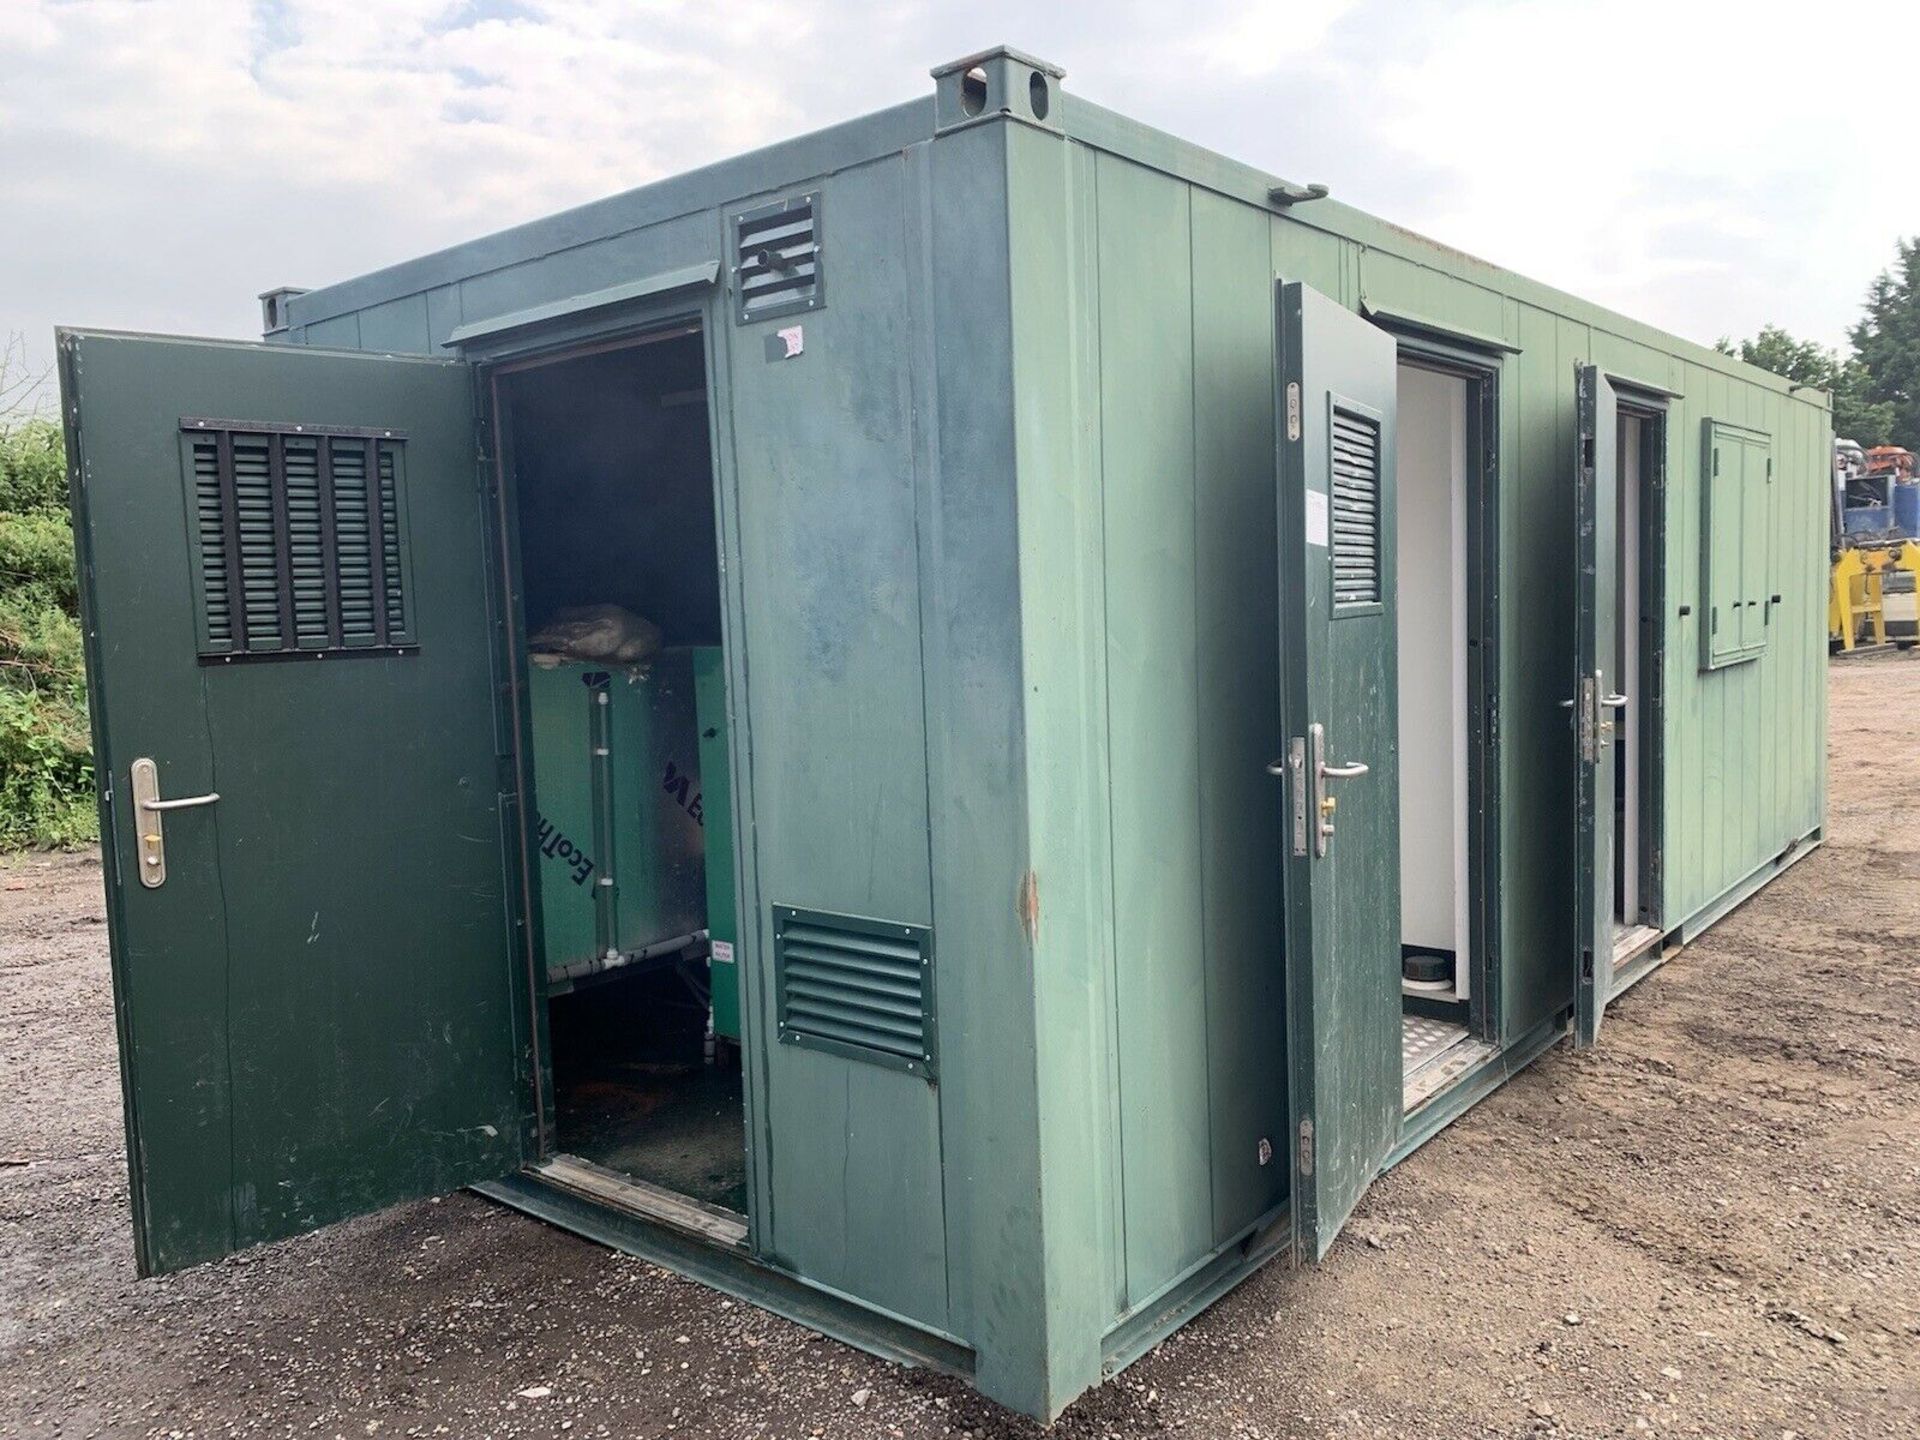 Welfare Unit ECO Portable Site Office Cabin Container Canteen Toilet Generator - Image 2 of 11